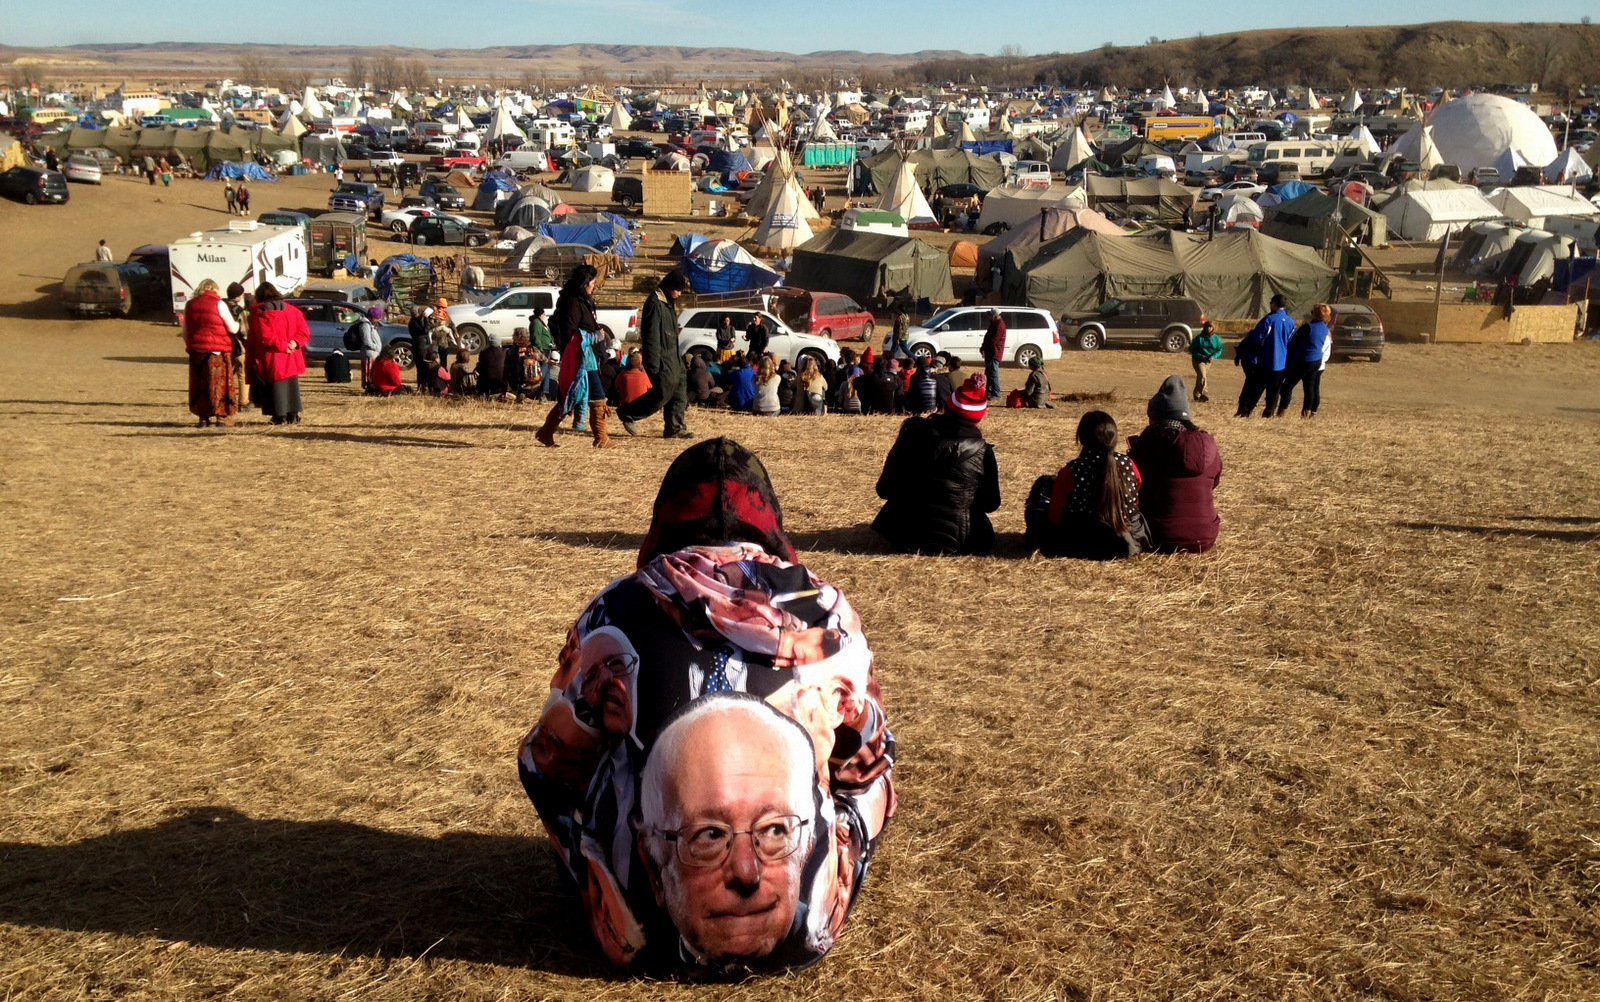 Protesters gather at an encampment on Saturday, Nov. 26, 2016, a day after tribal leaders received a letter from the U.S. Army Corps of Engineers that told them the federal land would be closed to the public on Dec. 5, near Cannon Ball, N.D. The protesters said Saturday that they do not plan to leave and will continue to oppose construction of the Dakota Access oil pipeline. (AP photo/James MacPherson)